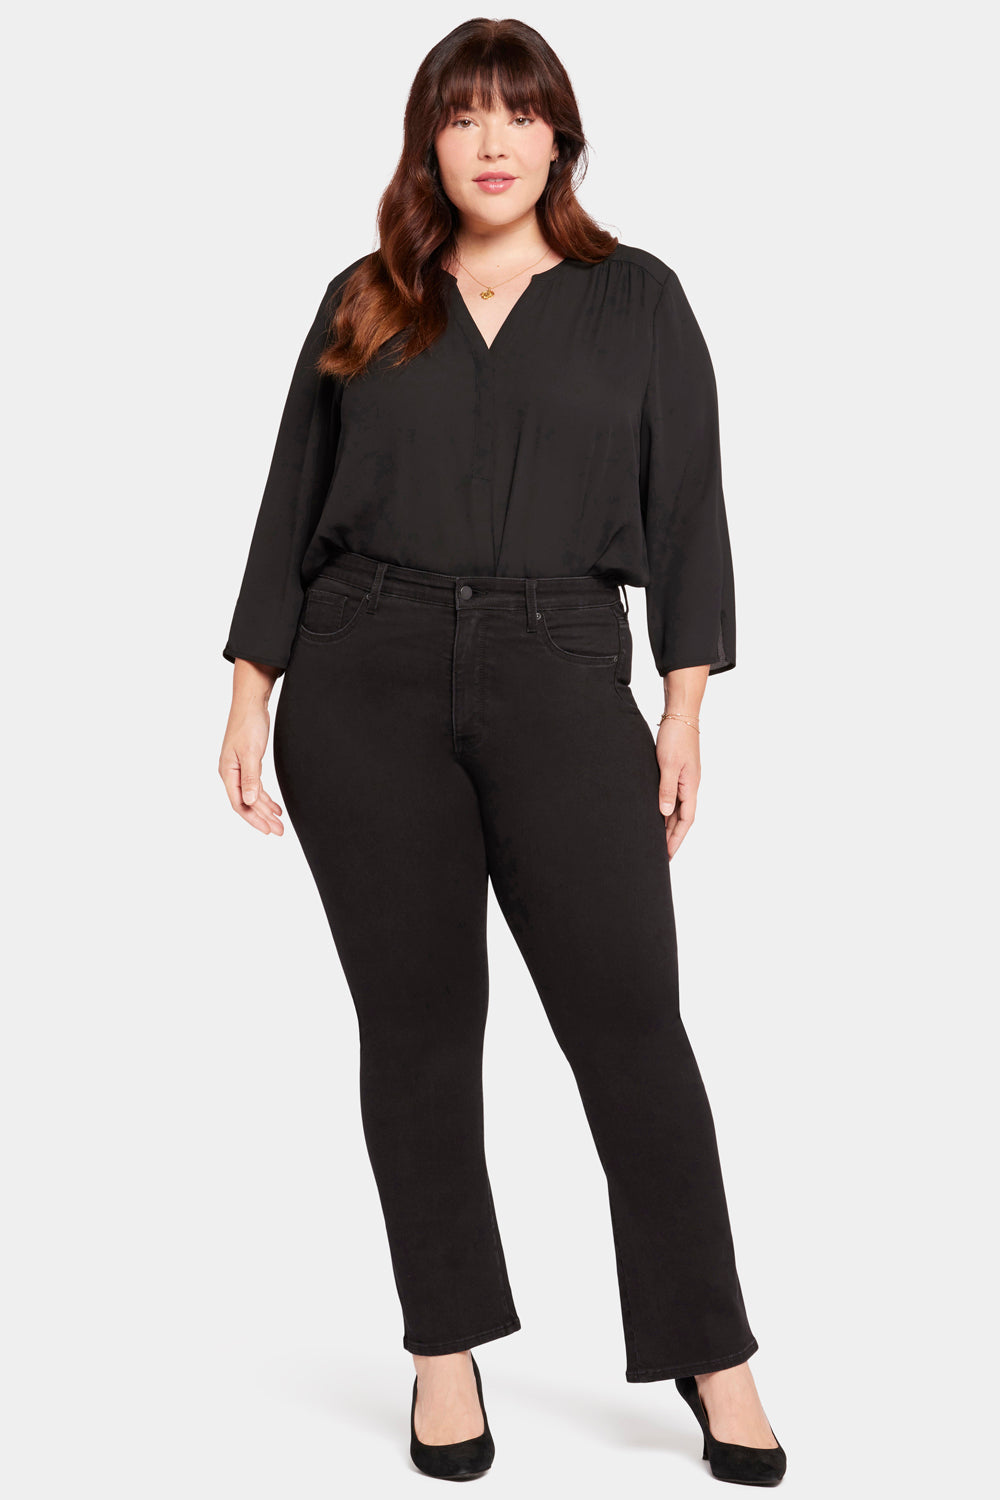 NYDJ Le Silhouette Slim Bootcut Jeans In Petite Plus Size With High Rise - Stellar